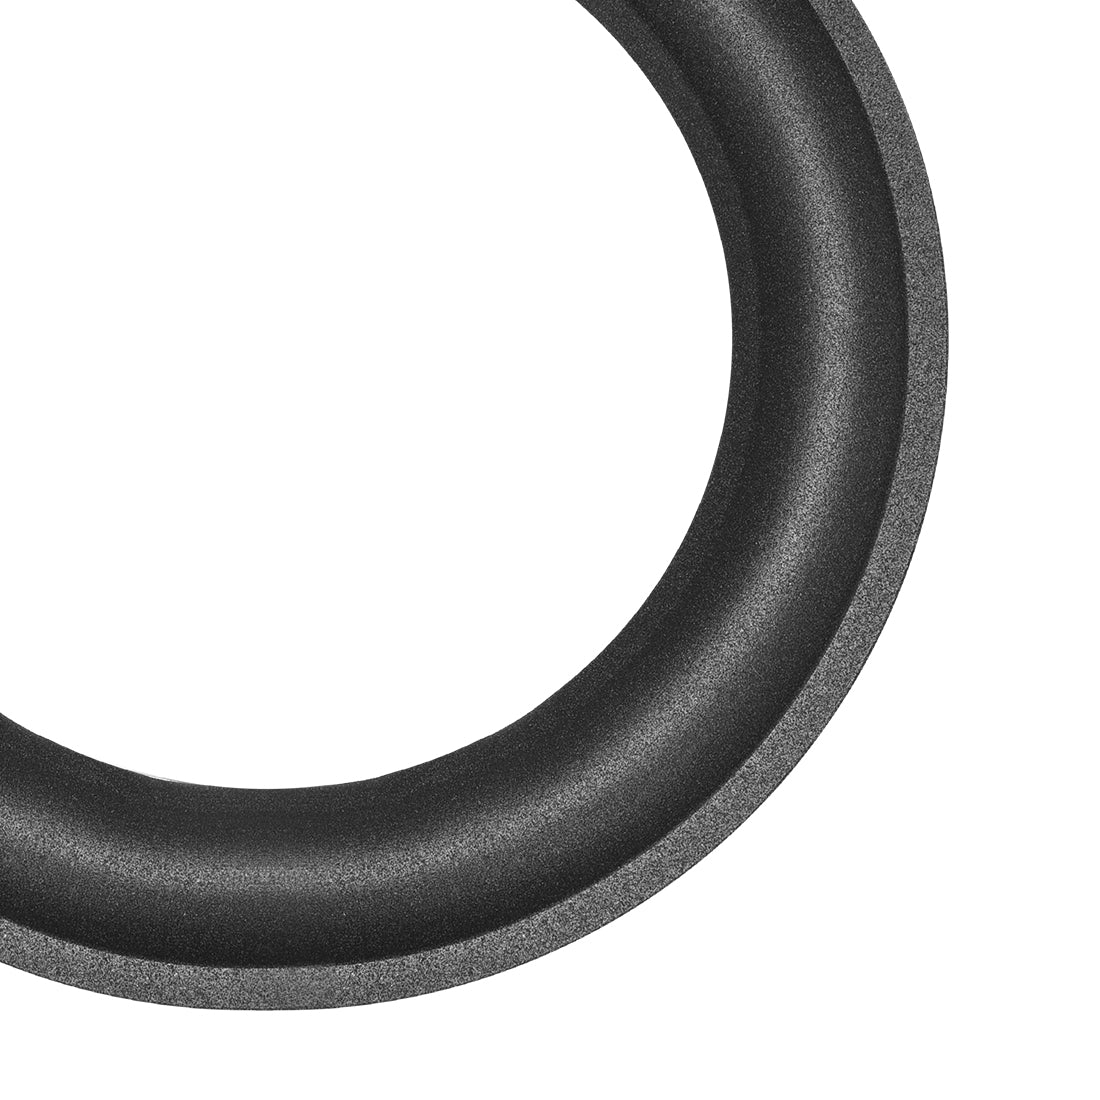 uxcell Uxcell 161mm( 6.34 Inches) Speaker Foam Edge Surround Rings Replacement Parts for Speaker Repair or DIY 2pcs